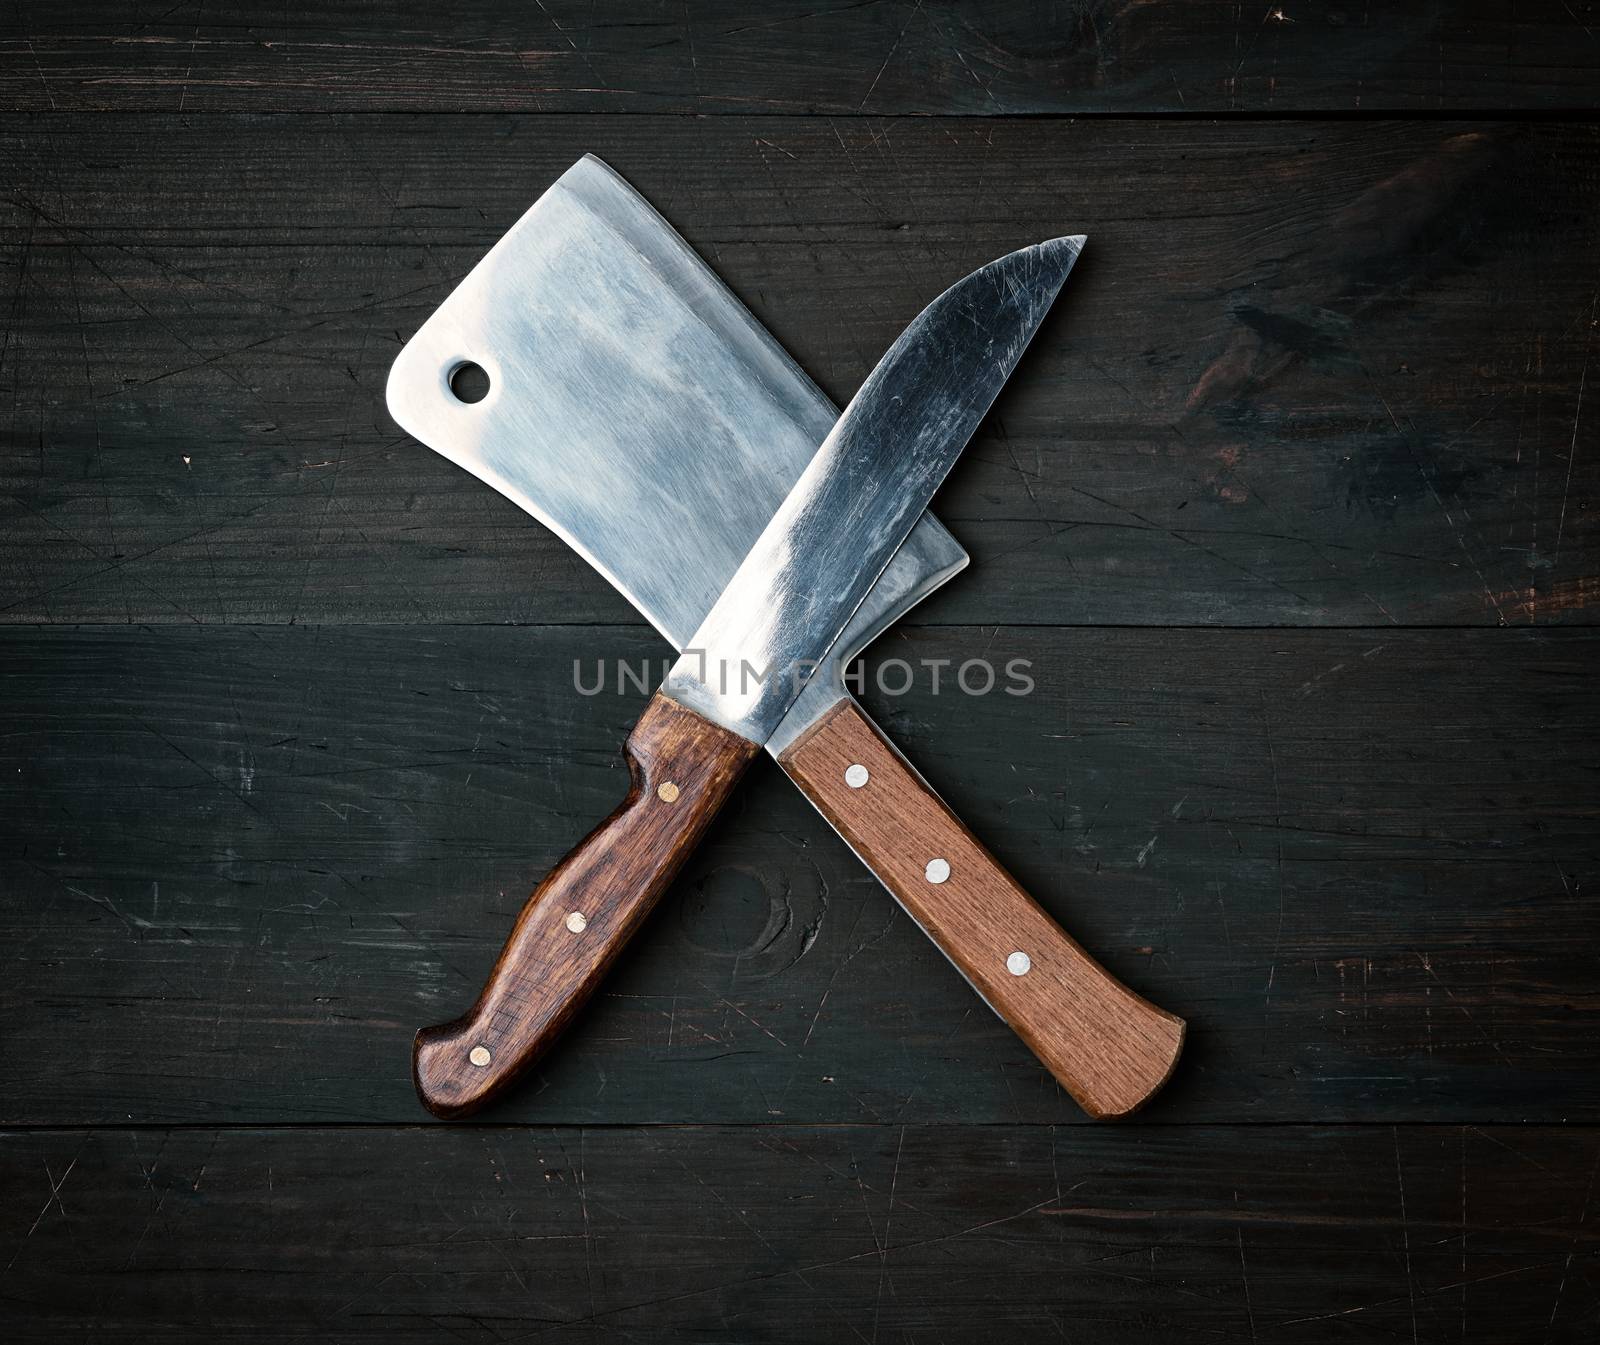 two sharp knives lie on a brown wooden surface, kitchen items ar by ndanko